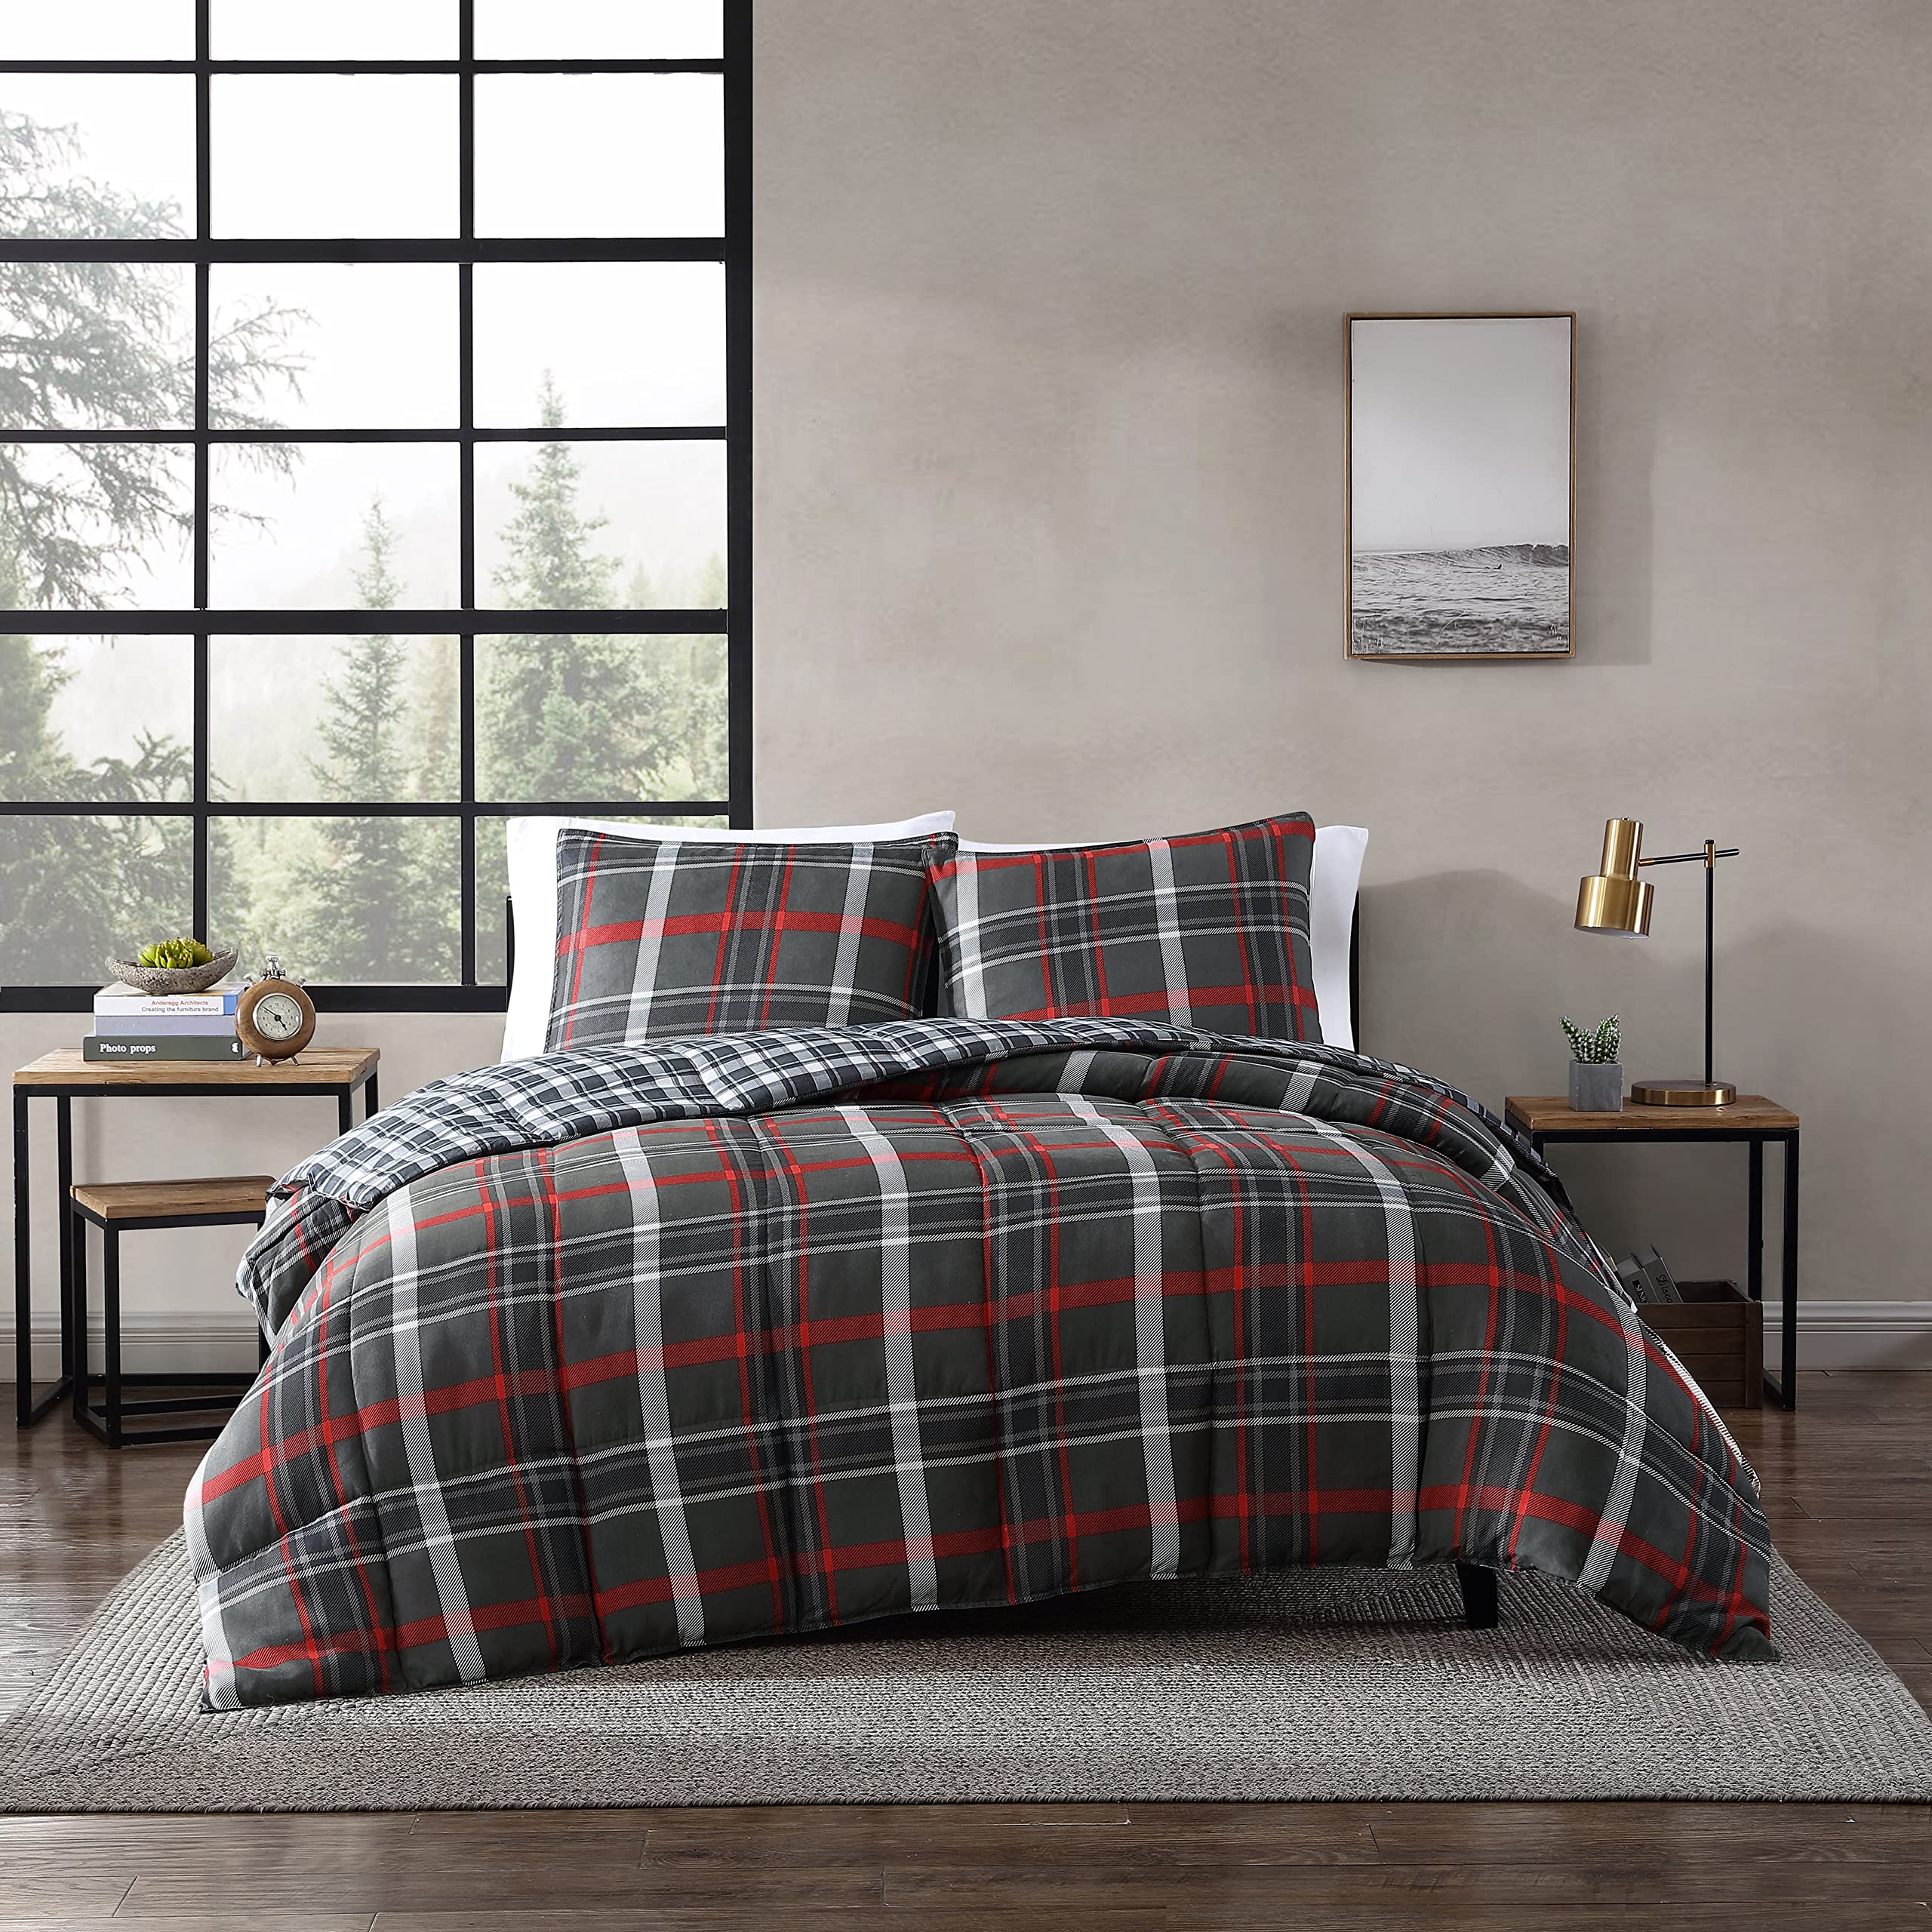 Book Cover Eddie Bauer - Twin Comforter Set, Reversible Plaid Bedding with Matching Sham, Home Decor for Colder Months (Willow Dark Grey, Twin) Twin Willow Dark Grey/Red